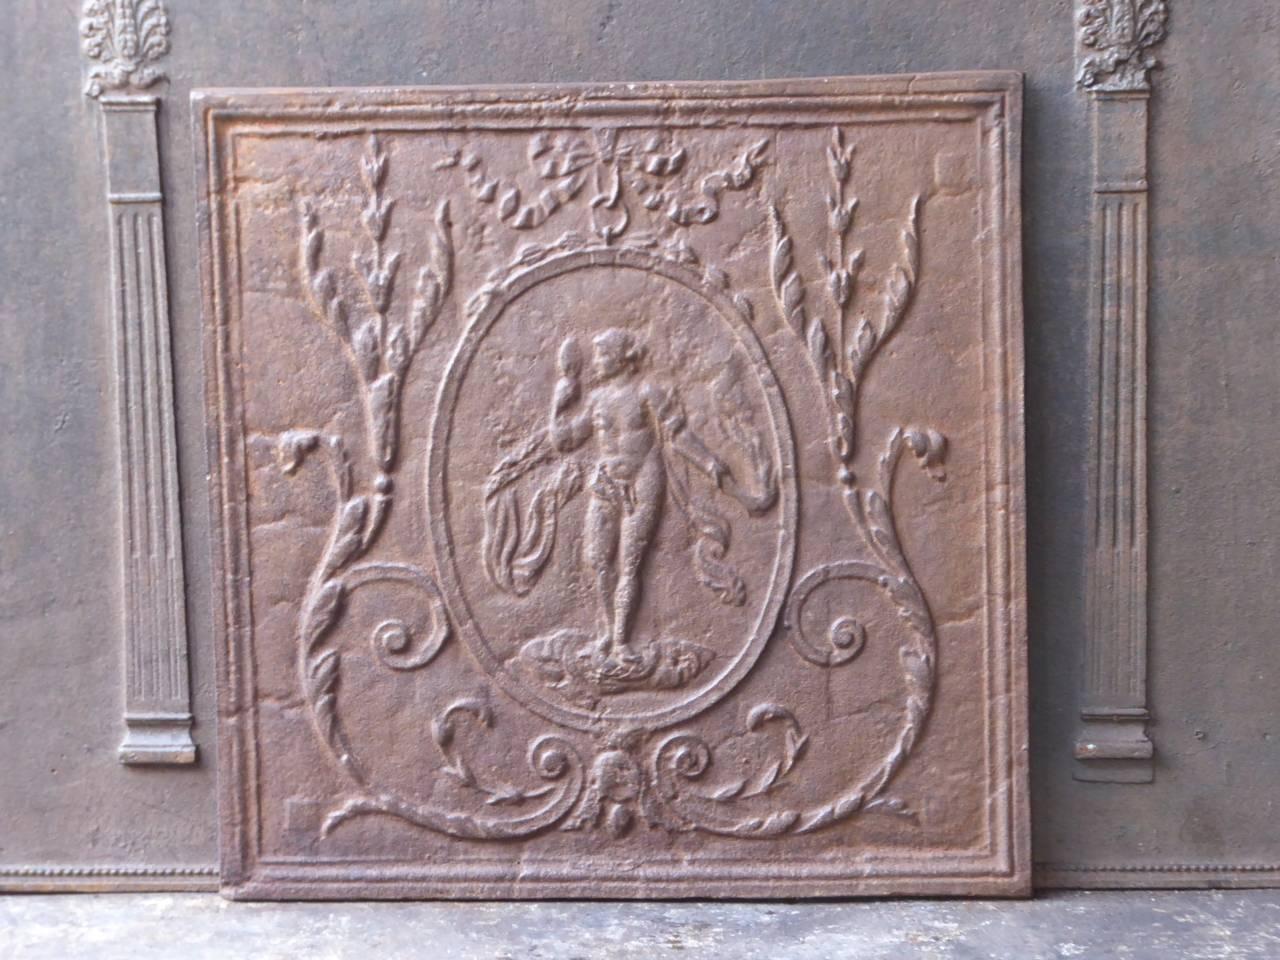 French Louis XV style fireback with the goddess Venus. Goddess of love, beauty and fertility.

We have a unique and specialized collection of antique and used fireplace accessories consisting of more than 1000 listings at 1stdibs. Amongst others, we